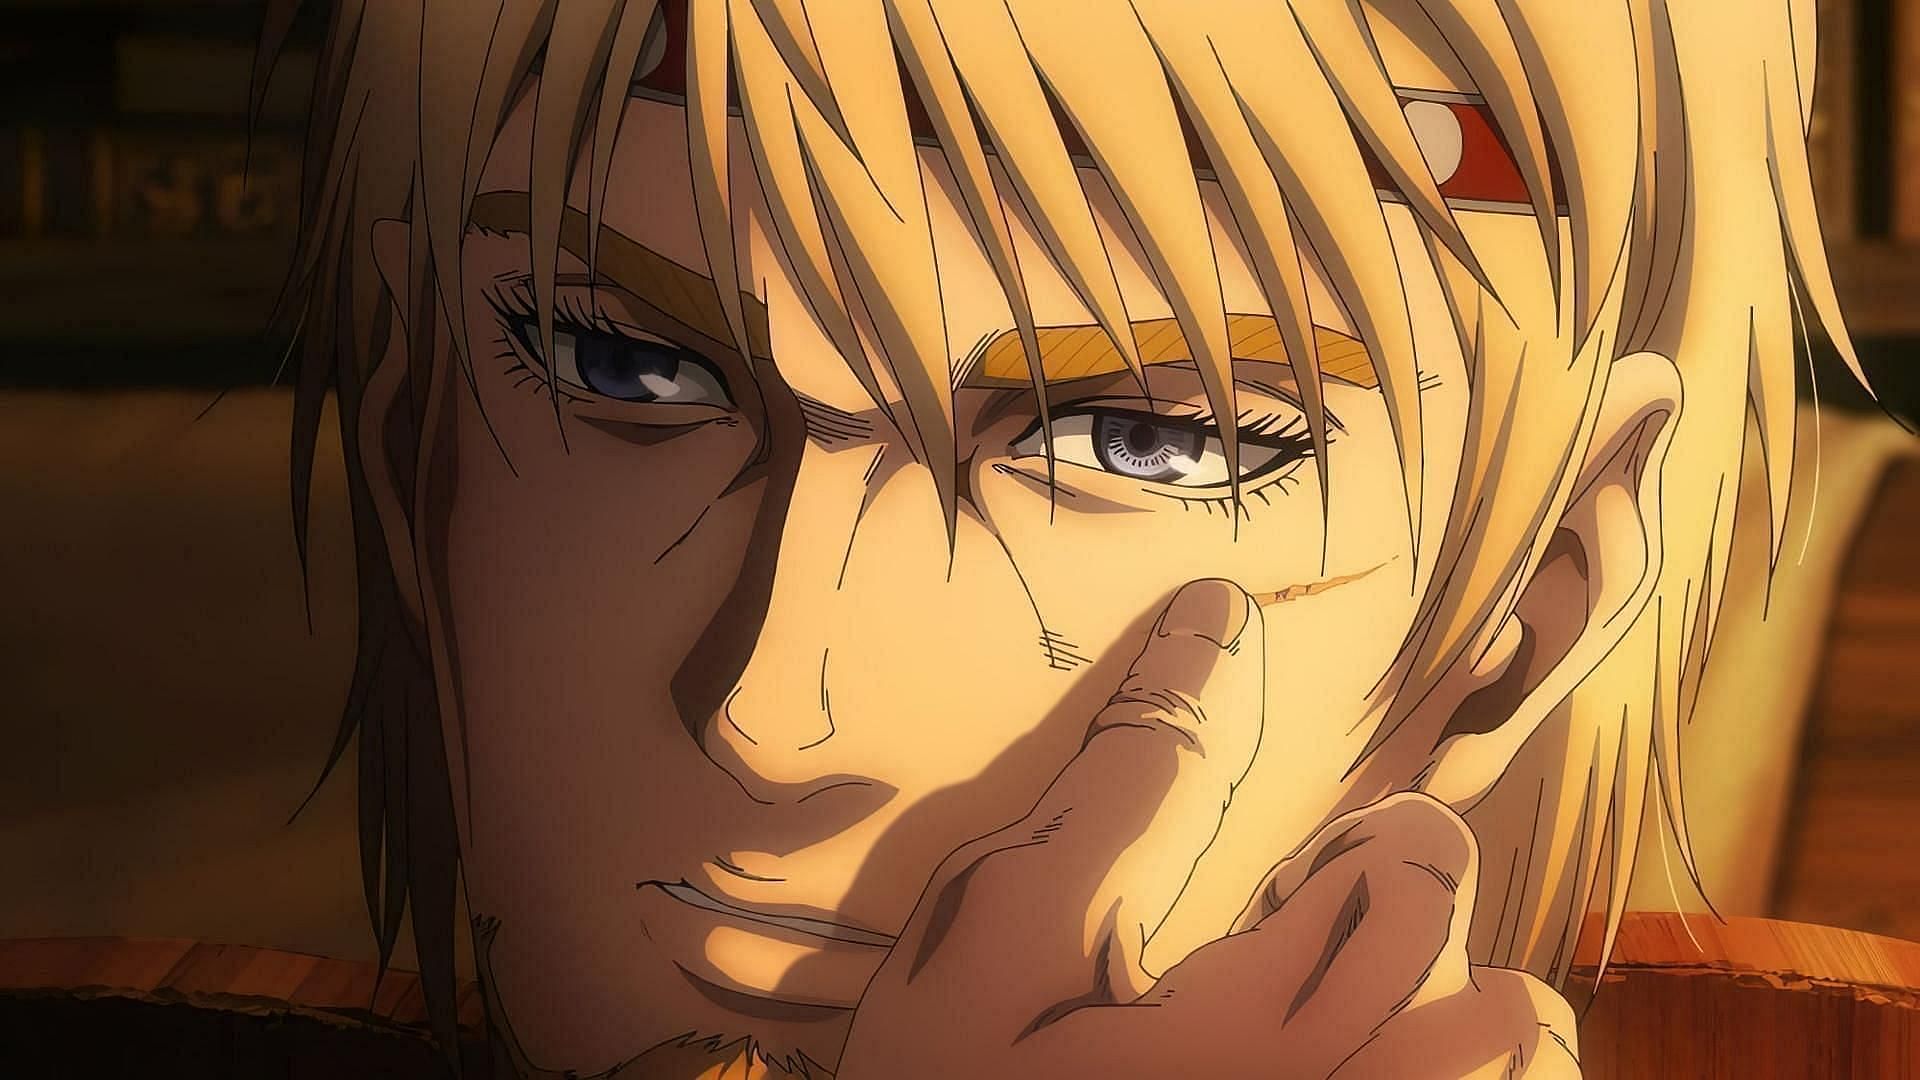 Vinland Saga season 2 episode 23: Release date and time, countdown, where to watch, and more (Image via MAPPA Studios)